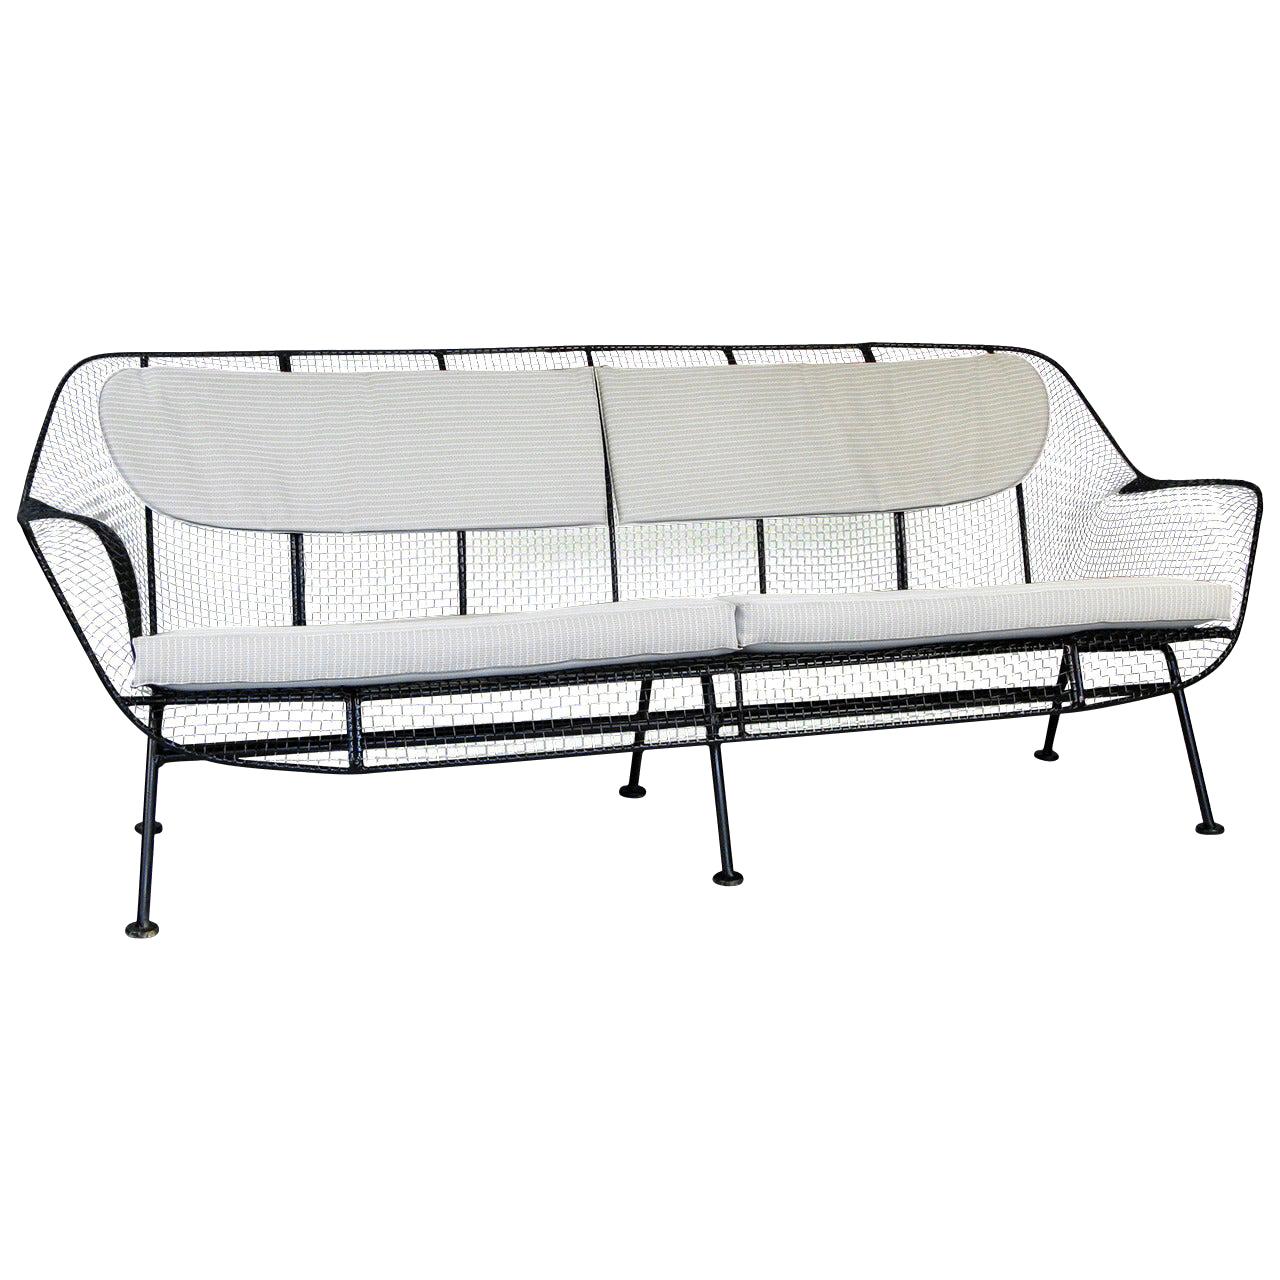 A rare example of Russell Woodard's iconic sculptura long sofa in wrought iron and woven steel mesh. Beautiful proportions in this wide and deep lounge sofa make this very comfortable and stylish. Finished in satin black or can be finished in color